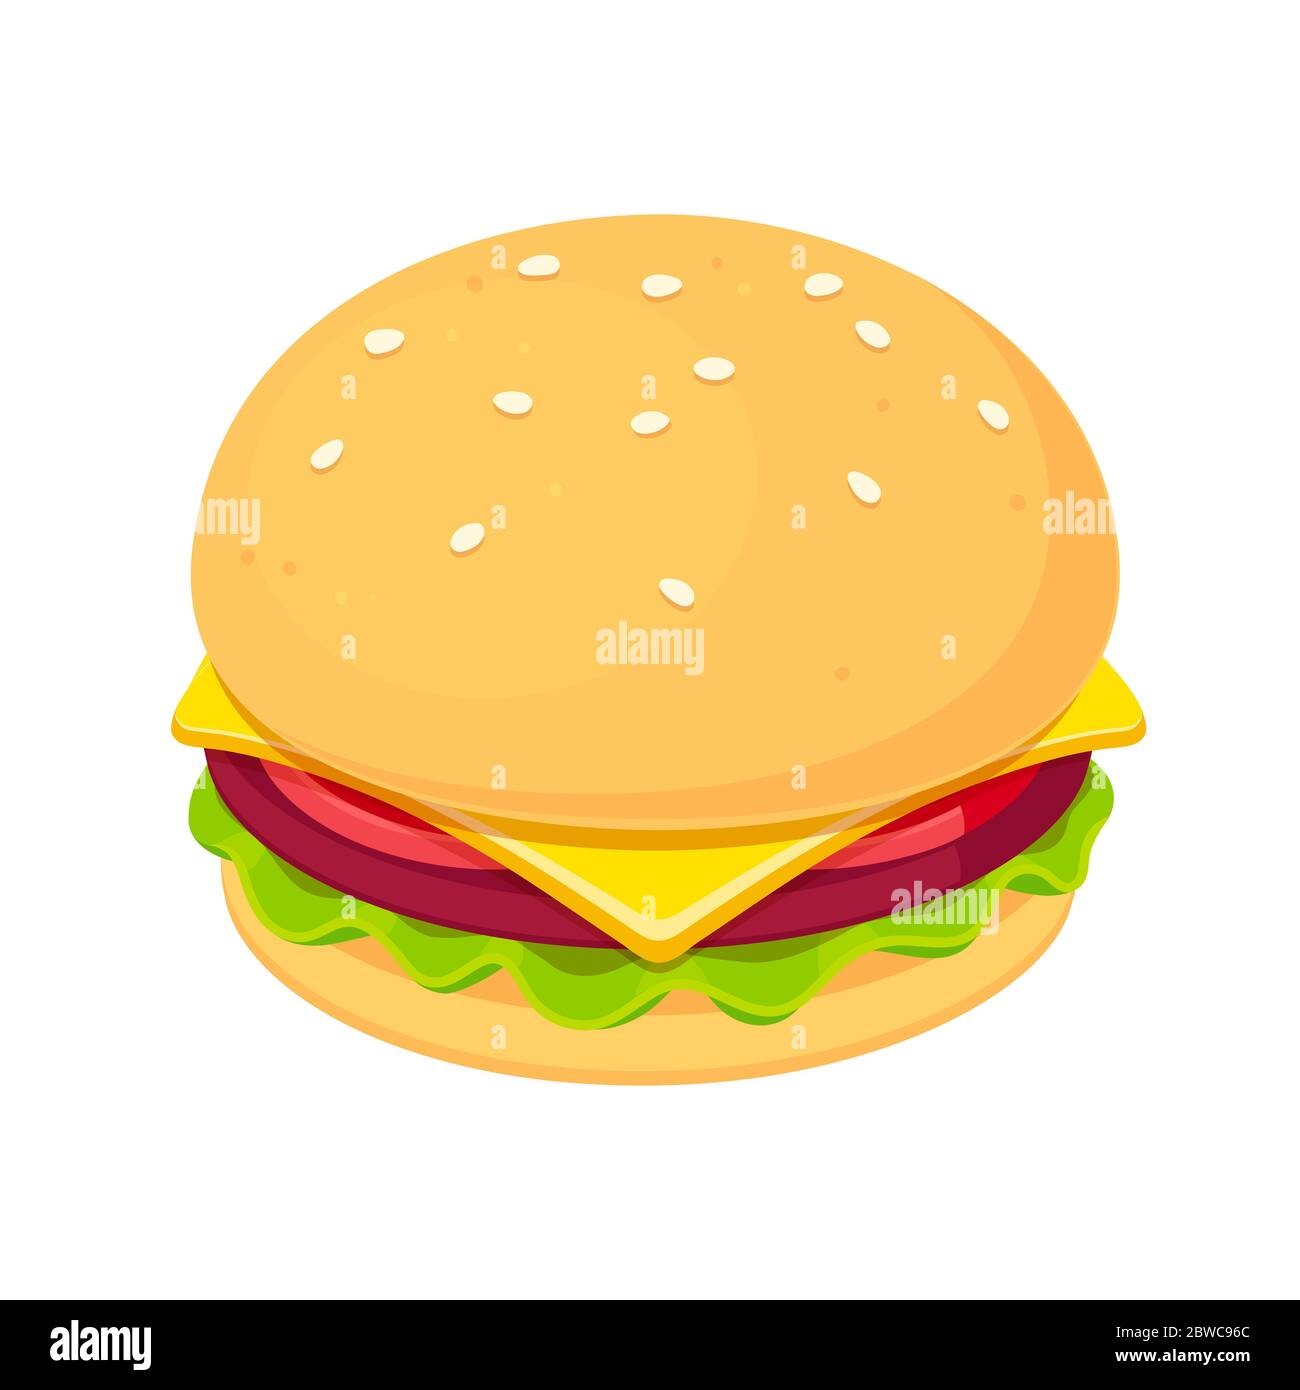 Burger clip art illustration in flat cartoon style. Isolated vector drawing  of cheeseburger with lettuce and tomato on sesame seed bun Stock Vector  Image & Art - Alamy